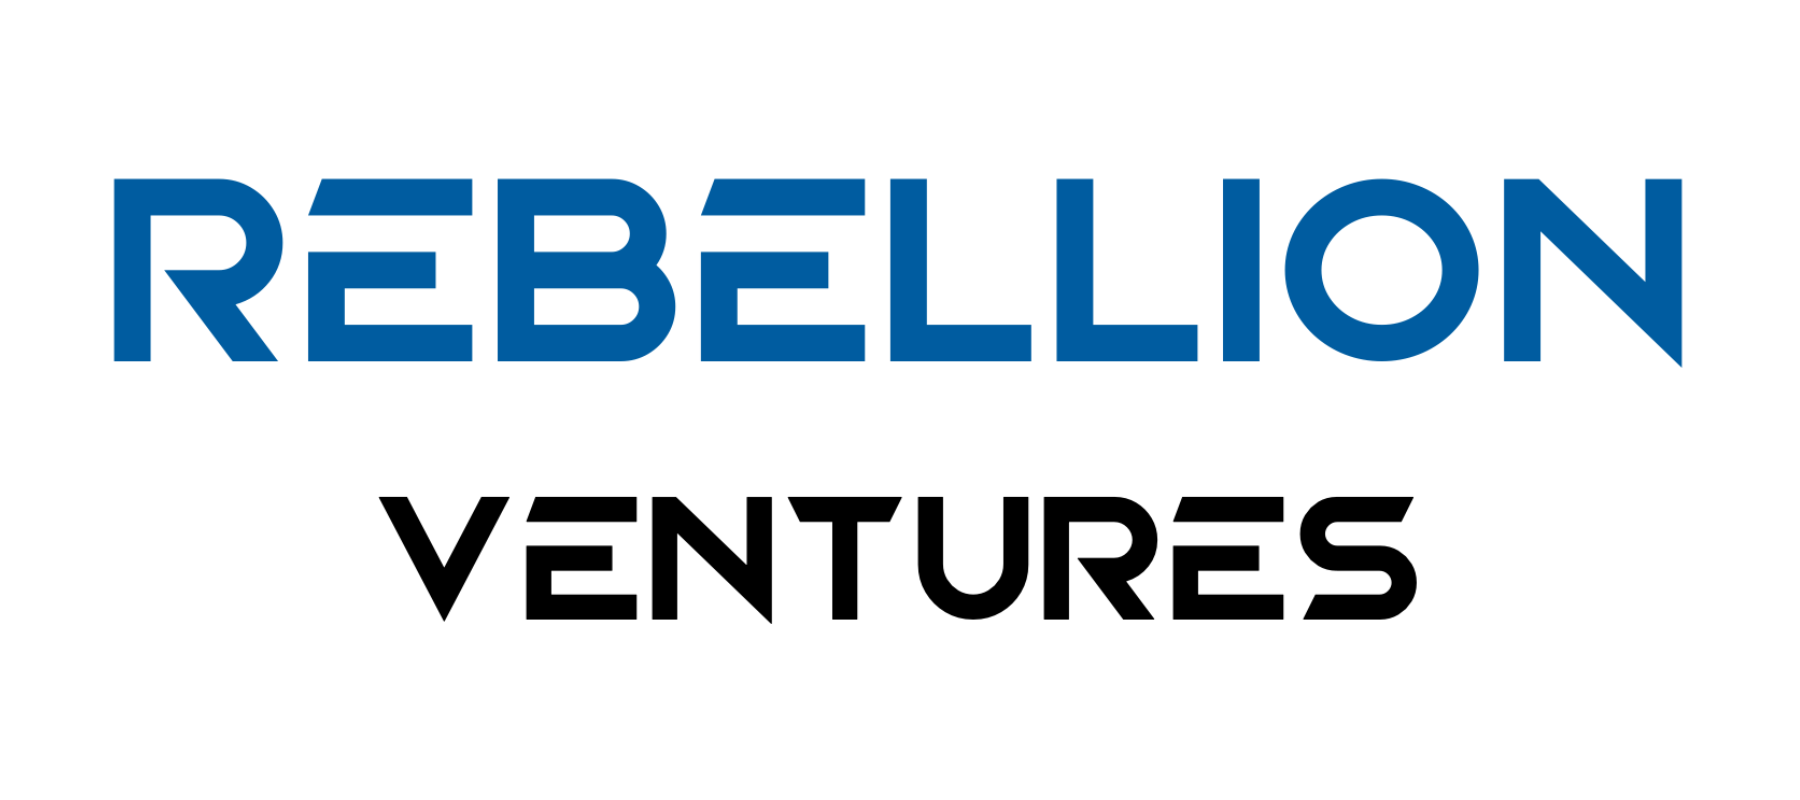 Rebellion Ventures emerges to build the future of AI super capability